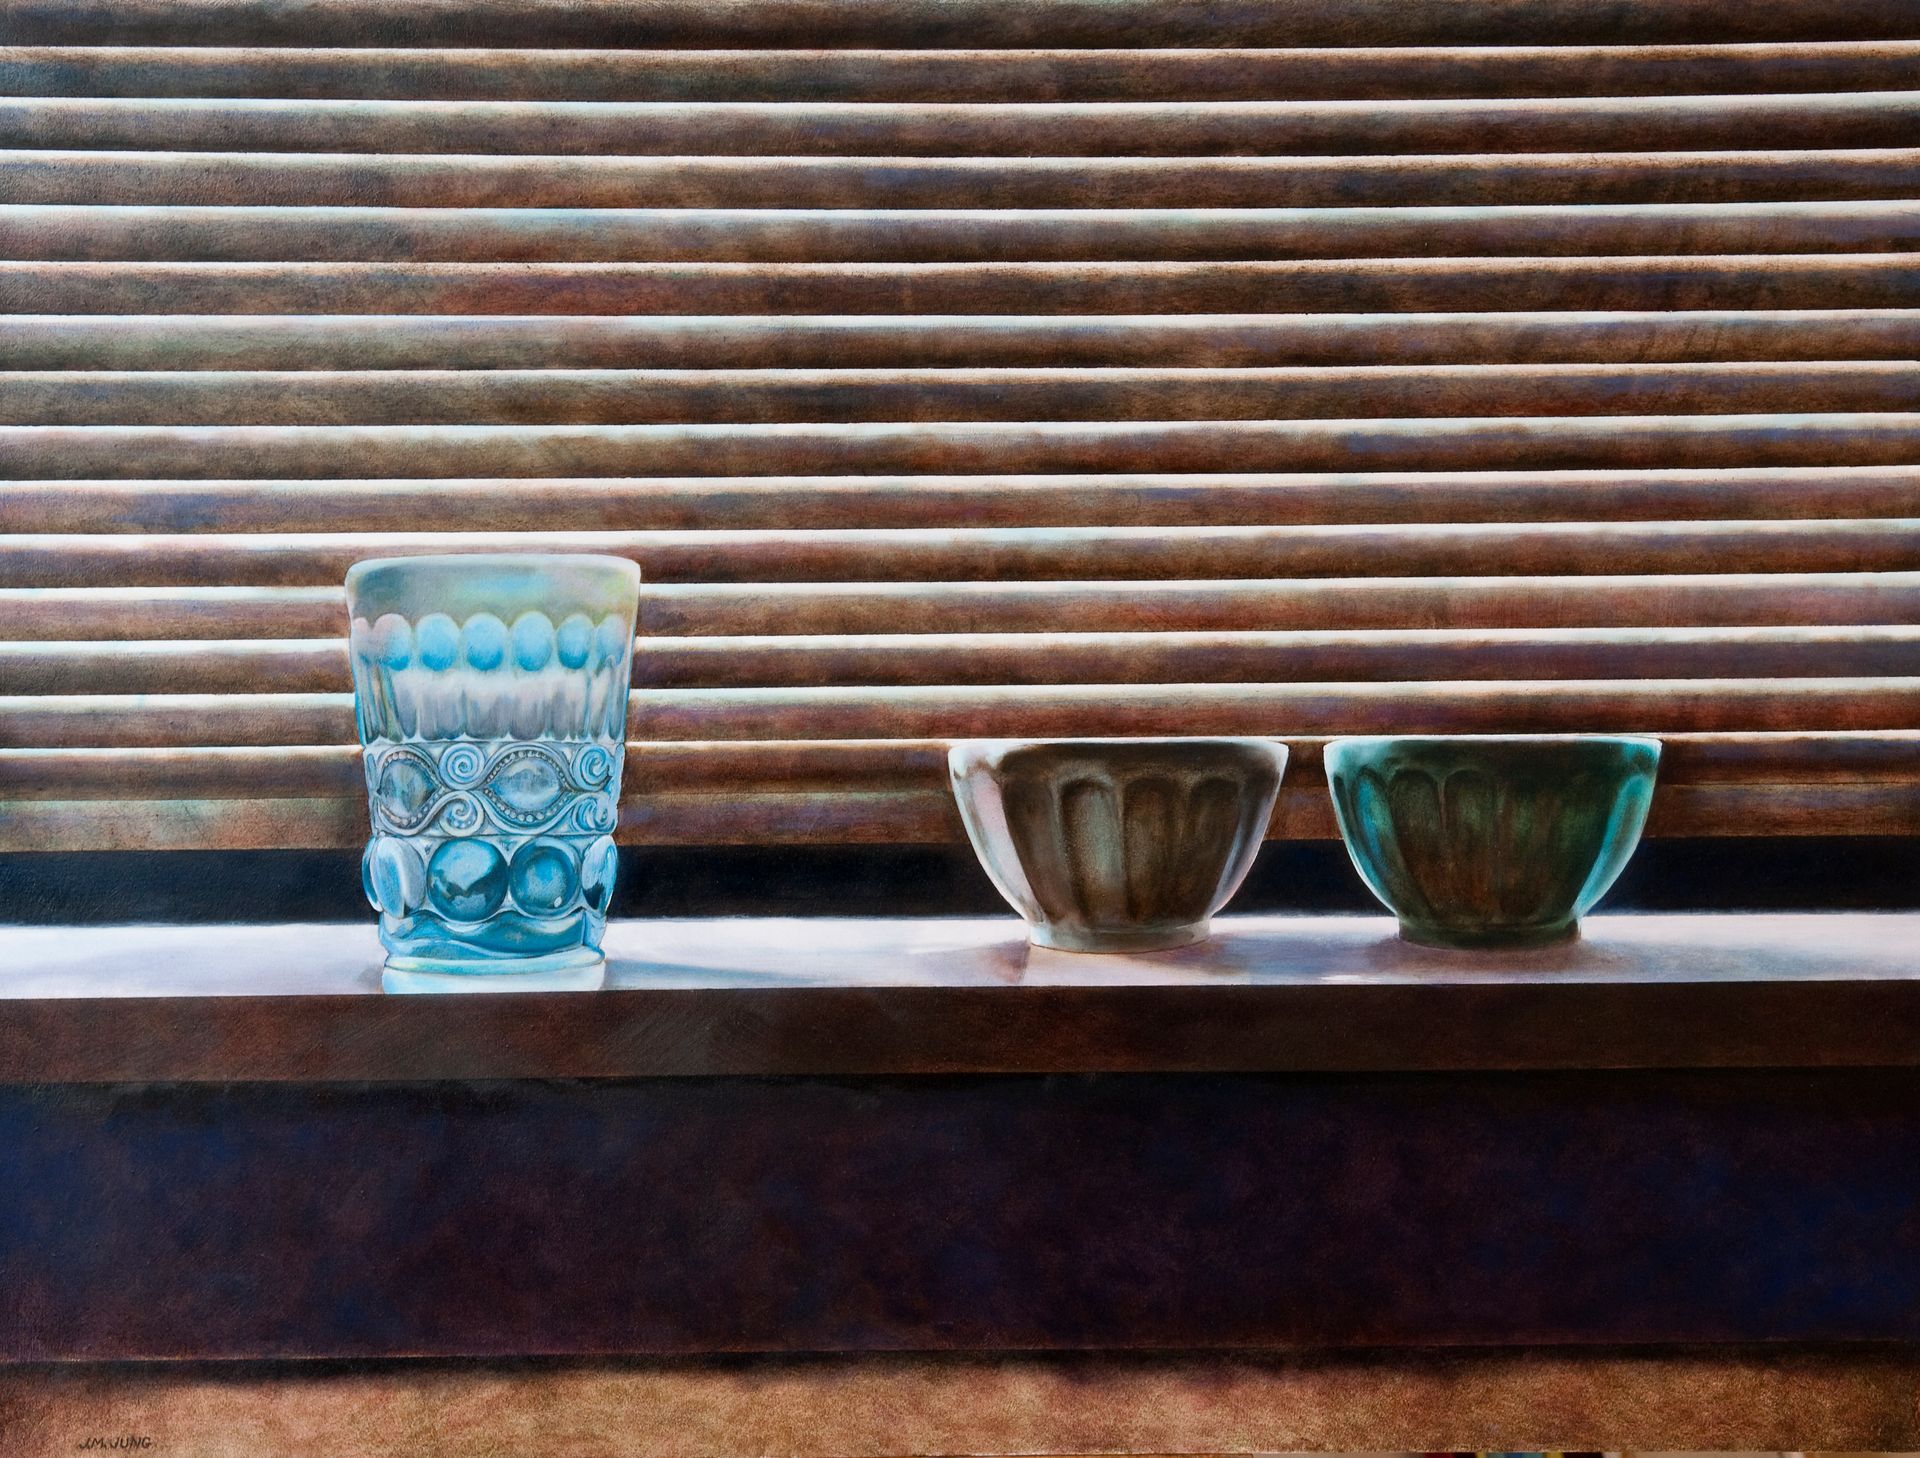 A blue molded glass and two small bowls, one gray, one blue, sitting on a windowsill with light from Venetian blinds falling over them.